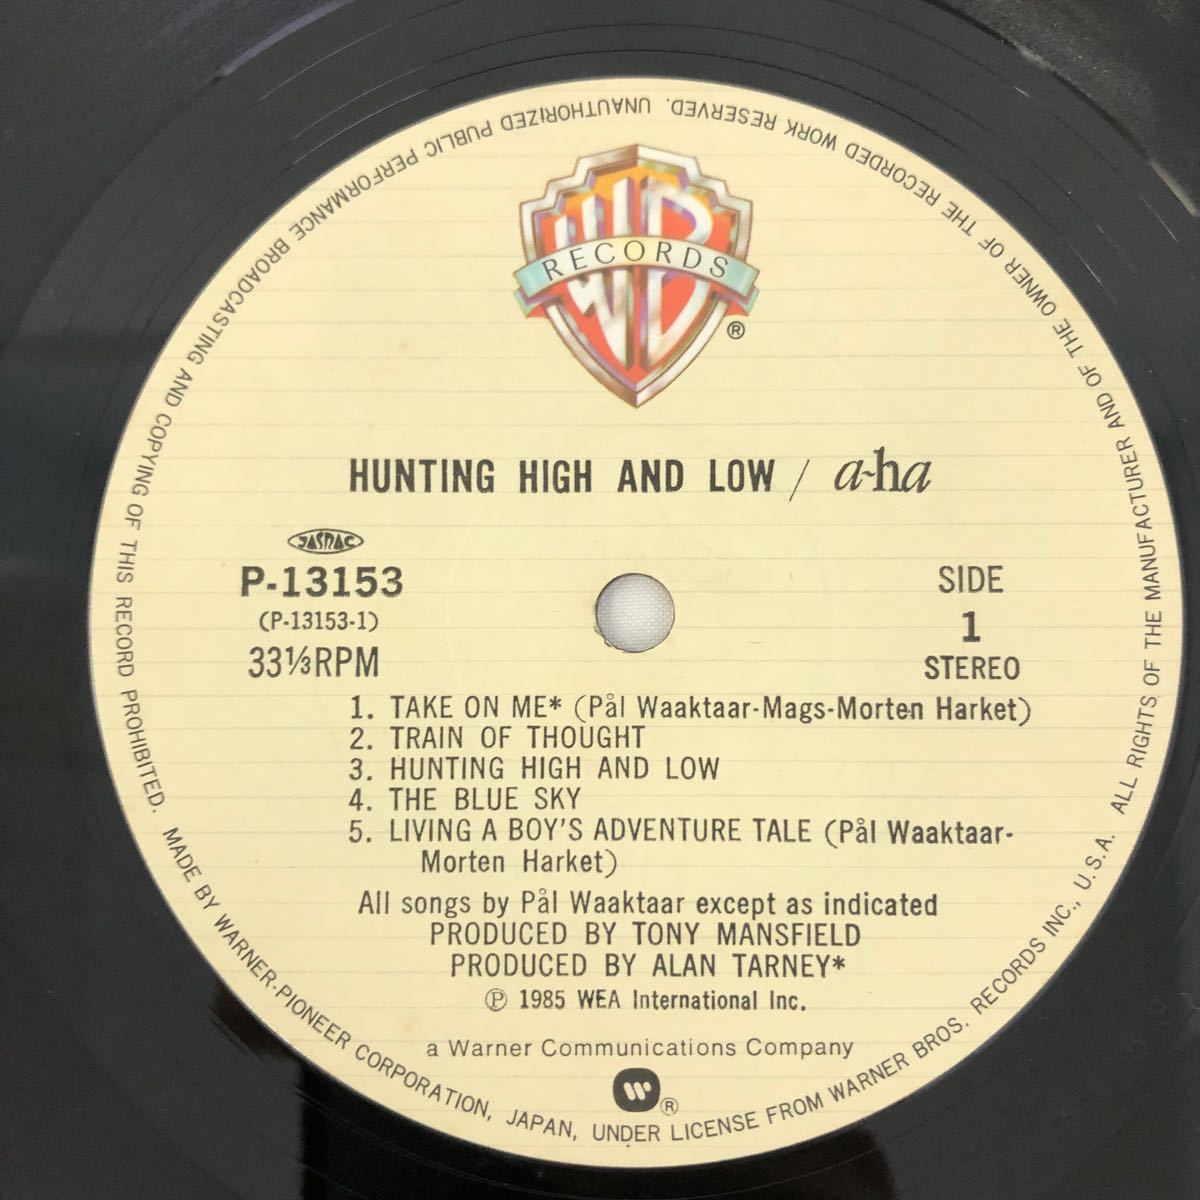 [LP] HUNTING HIGH AND LOW ハンティング・ハイ・アンド・ロウ a〜ha アーハ includes Take On Me P-13153 ワーナー・パイオニア 帯付_画像8